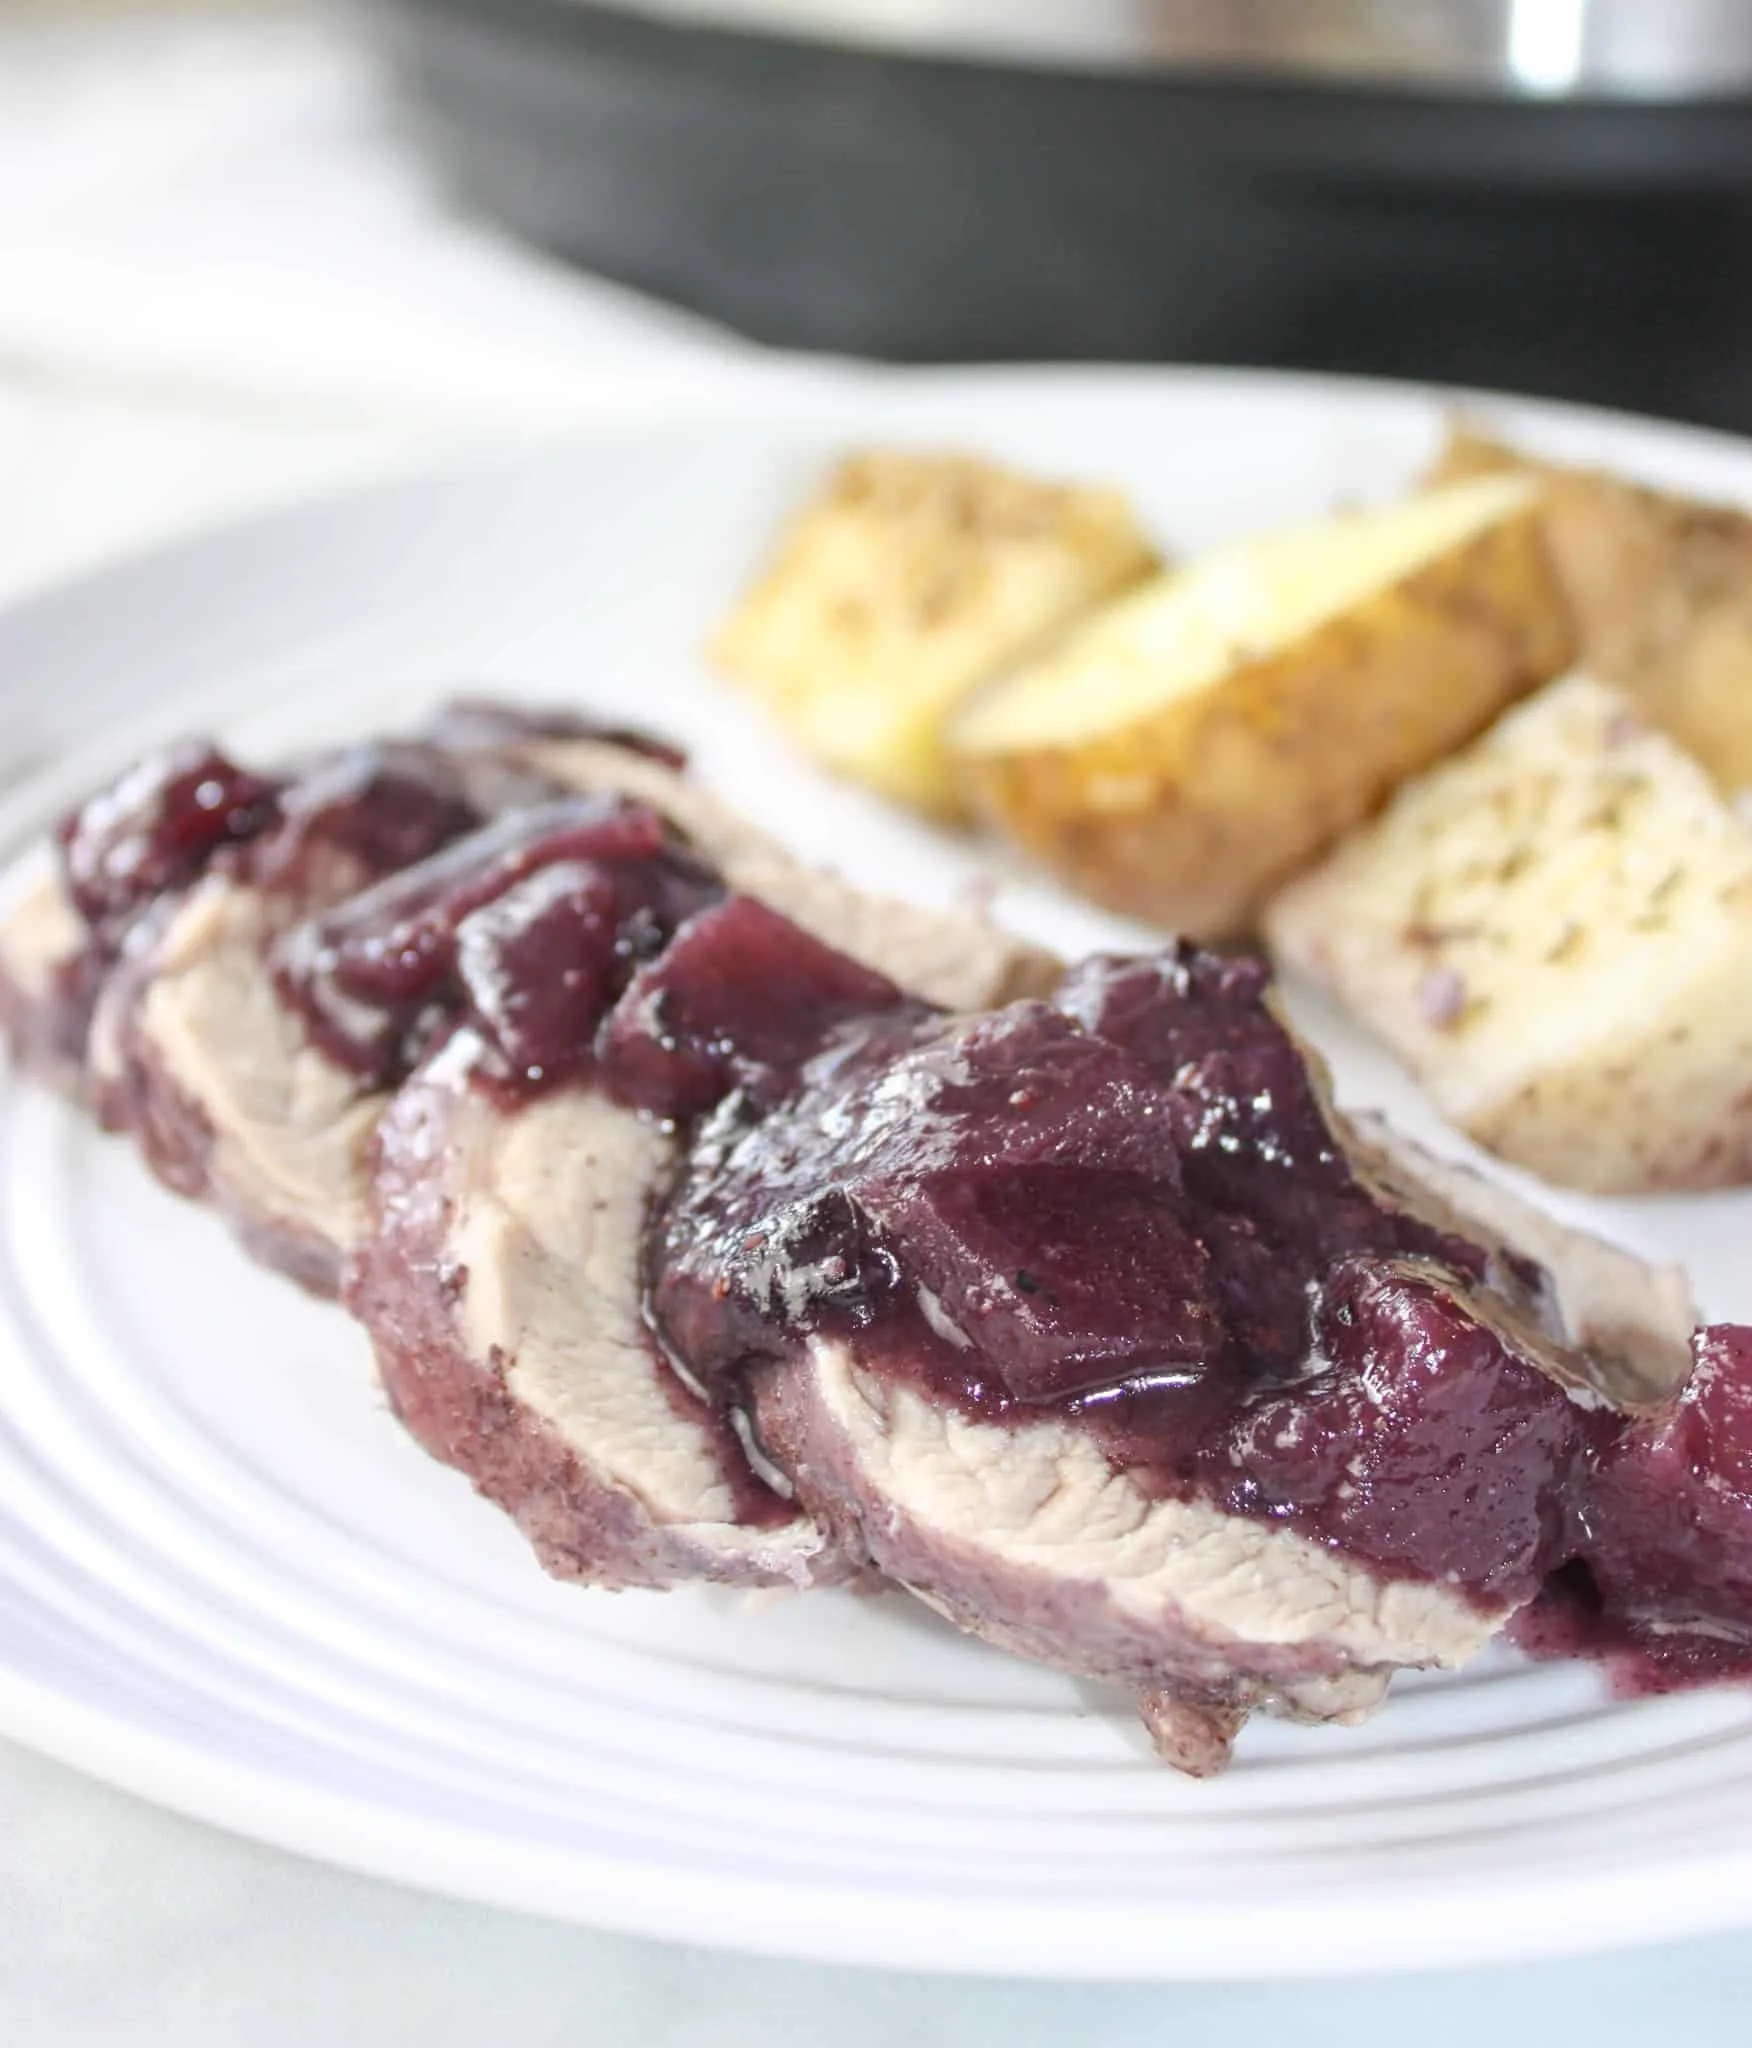 Blueberry Apple Pork Tenderloin & Potatoes is a recipe that will have people thinking you spent a great deal of time in the kitchen.